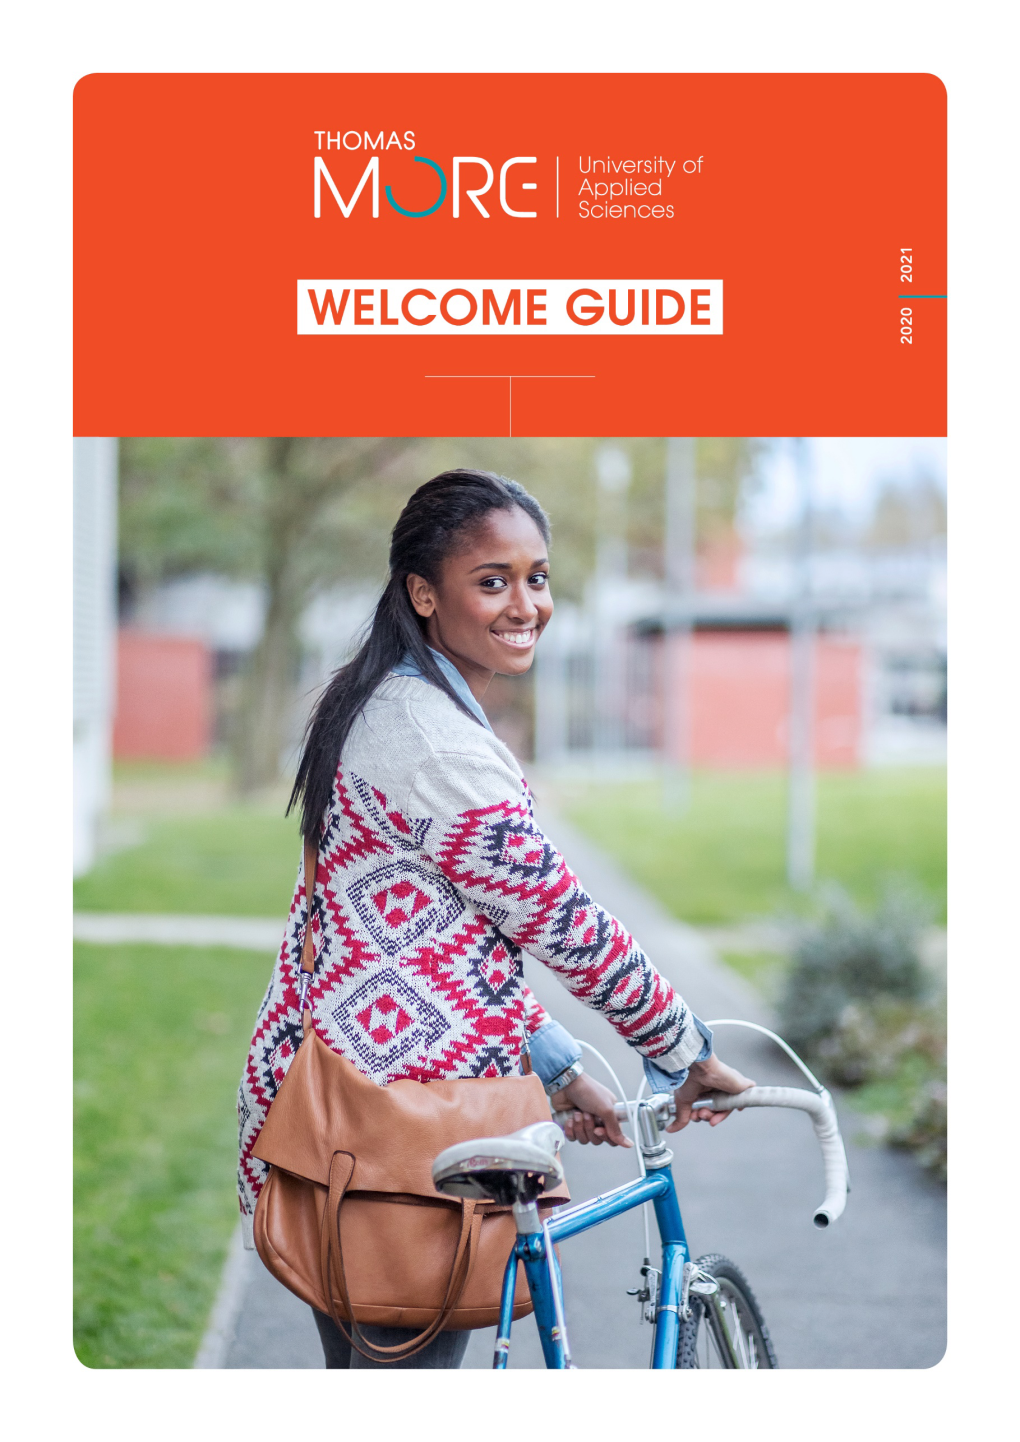 Student Welcome Guide